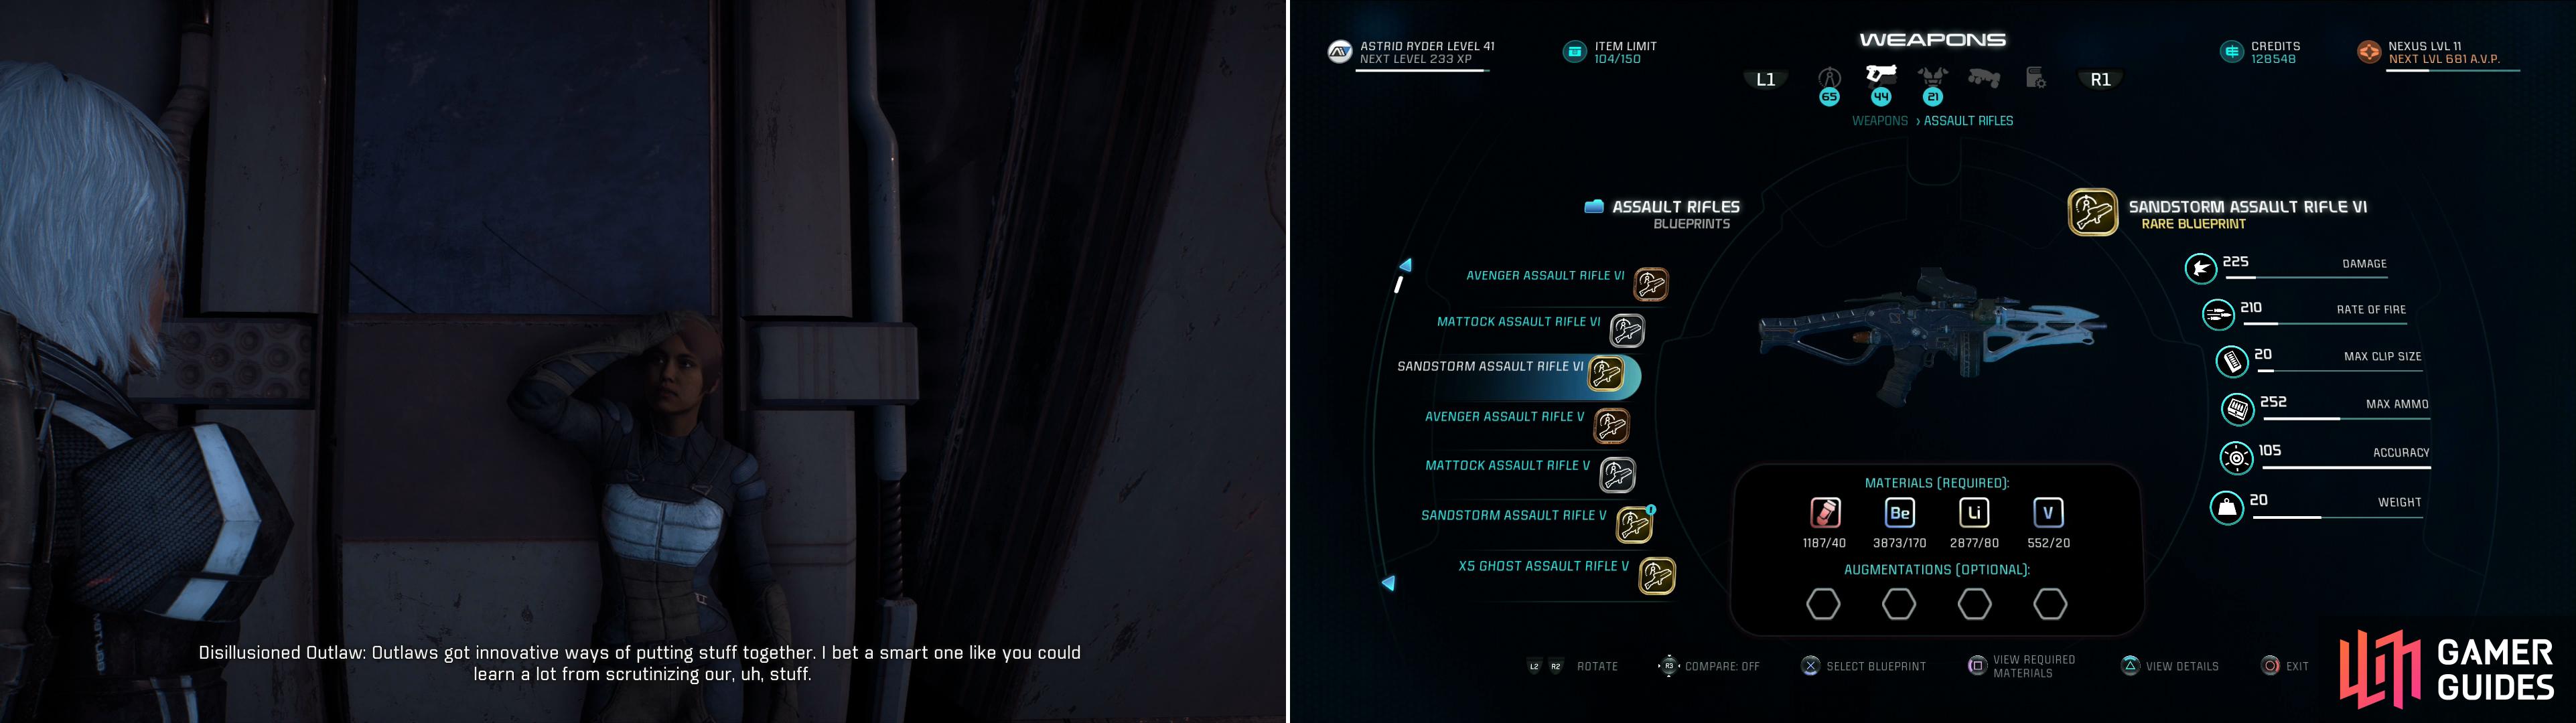 Talk to a Disillusioned Outlaw outside Tartarus (left) then build one of the Outlaw weapons he recommends (right).